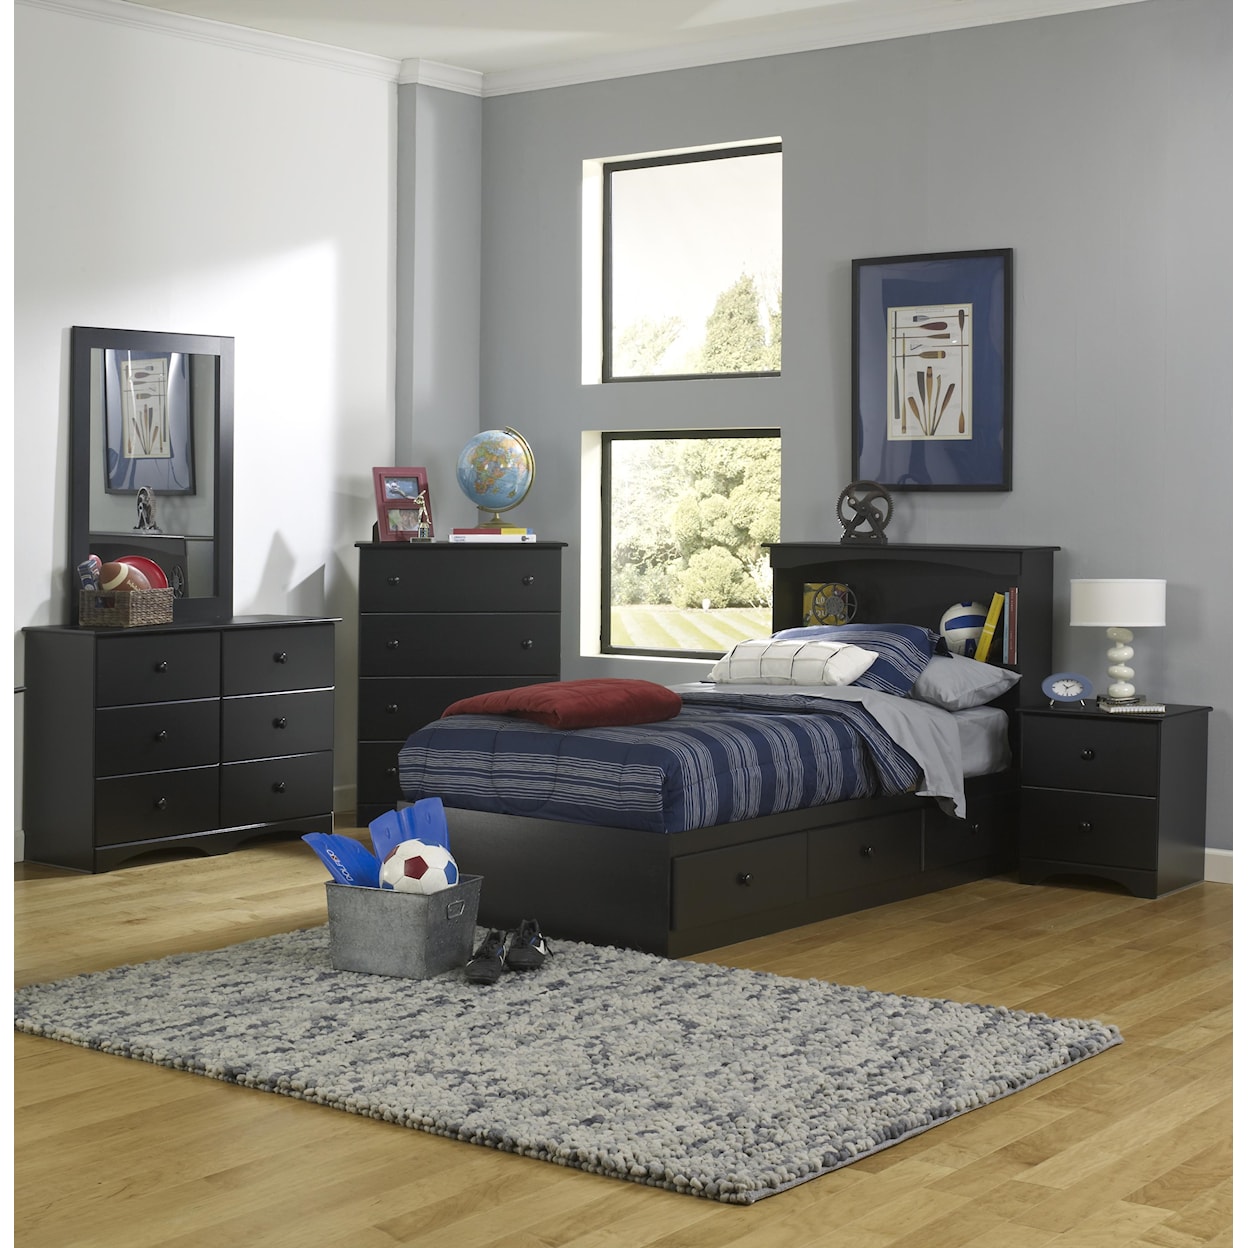 Perdue 5000 Series Full Bookcase Bed with Storage Package